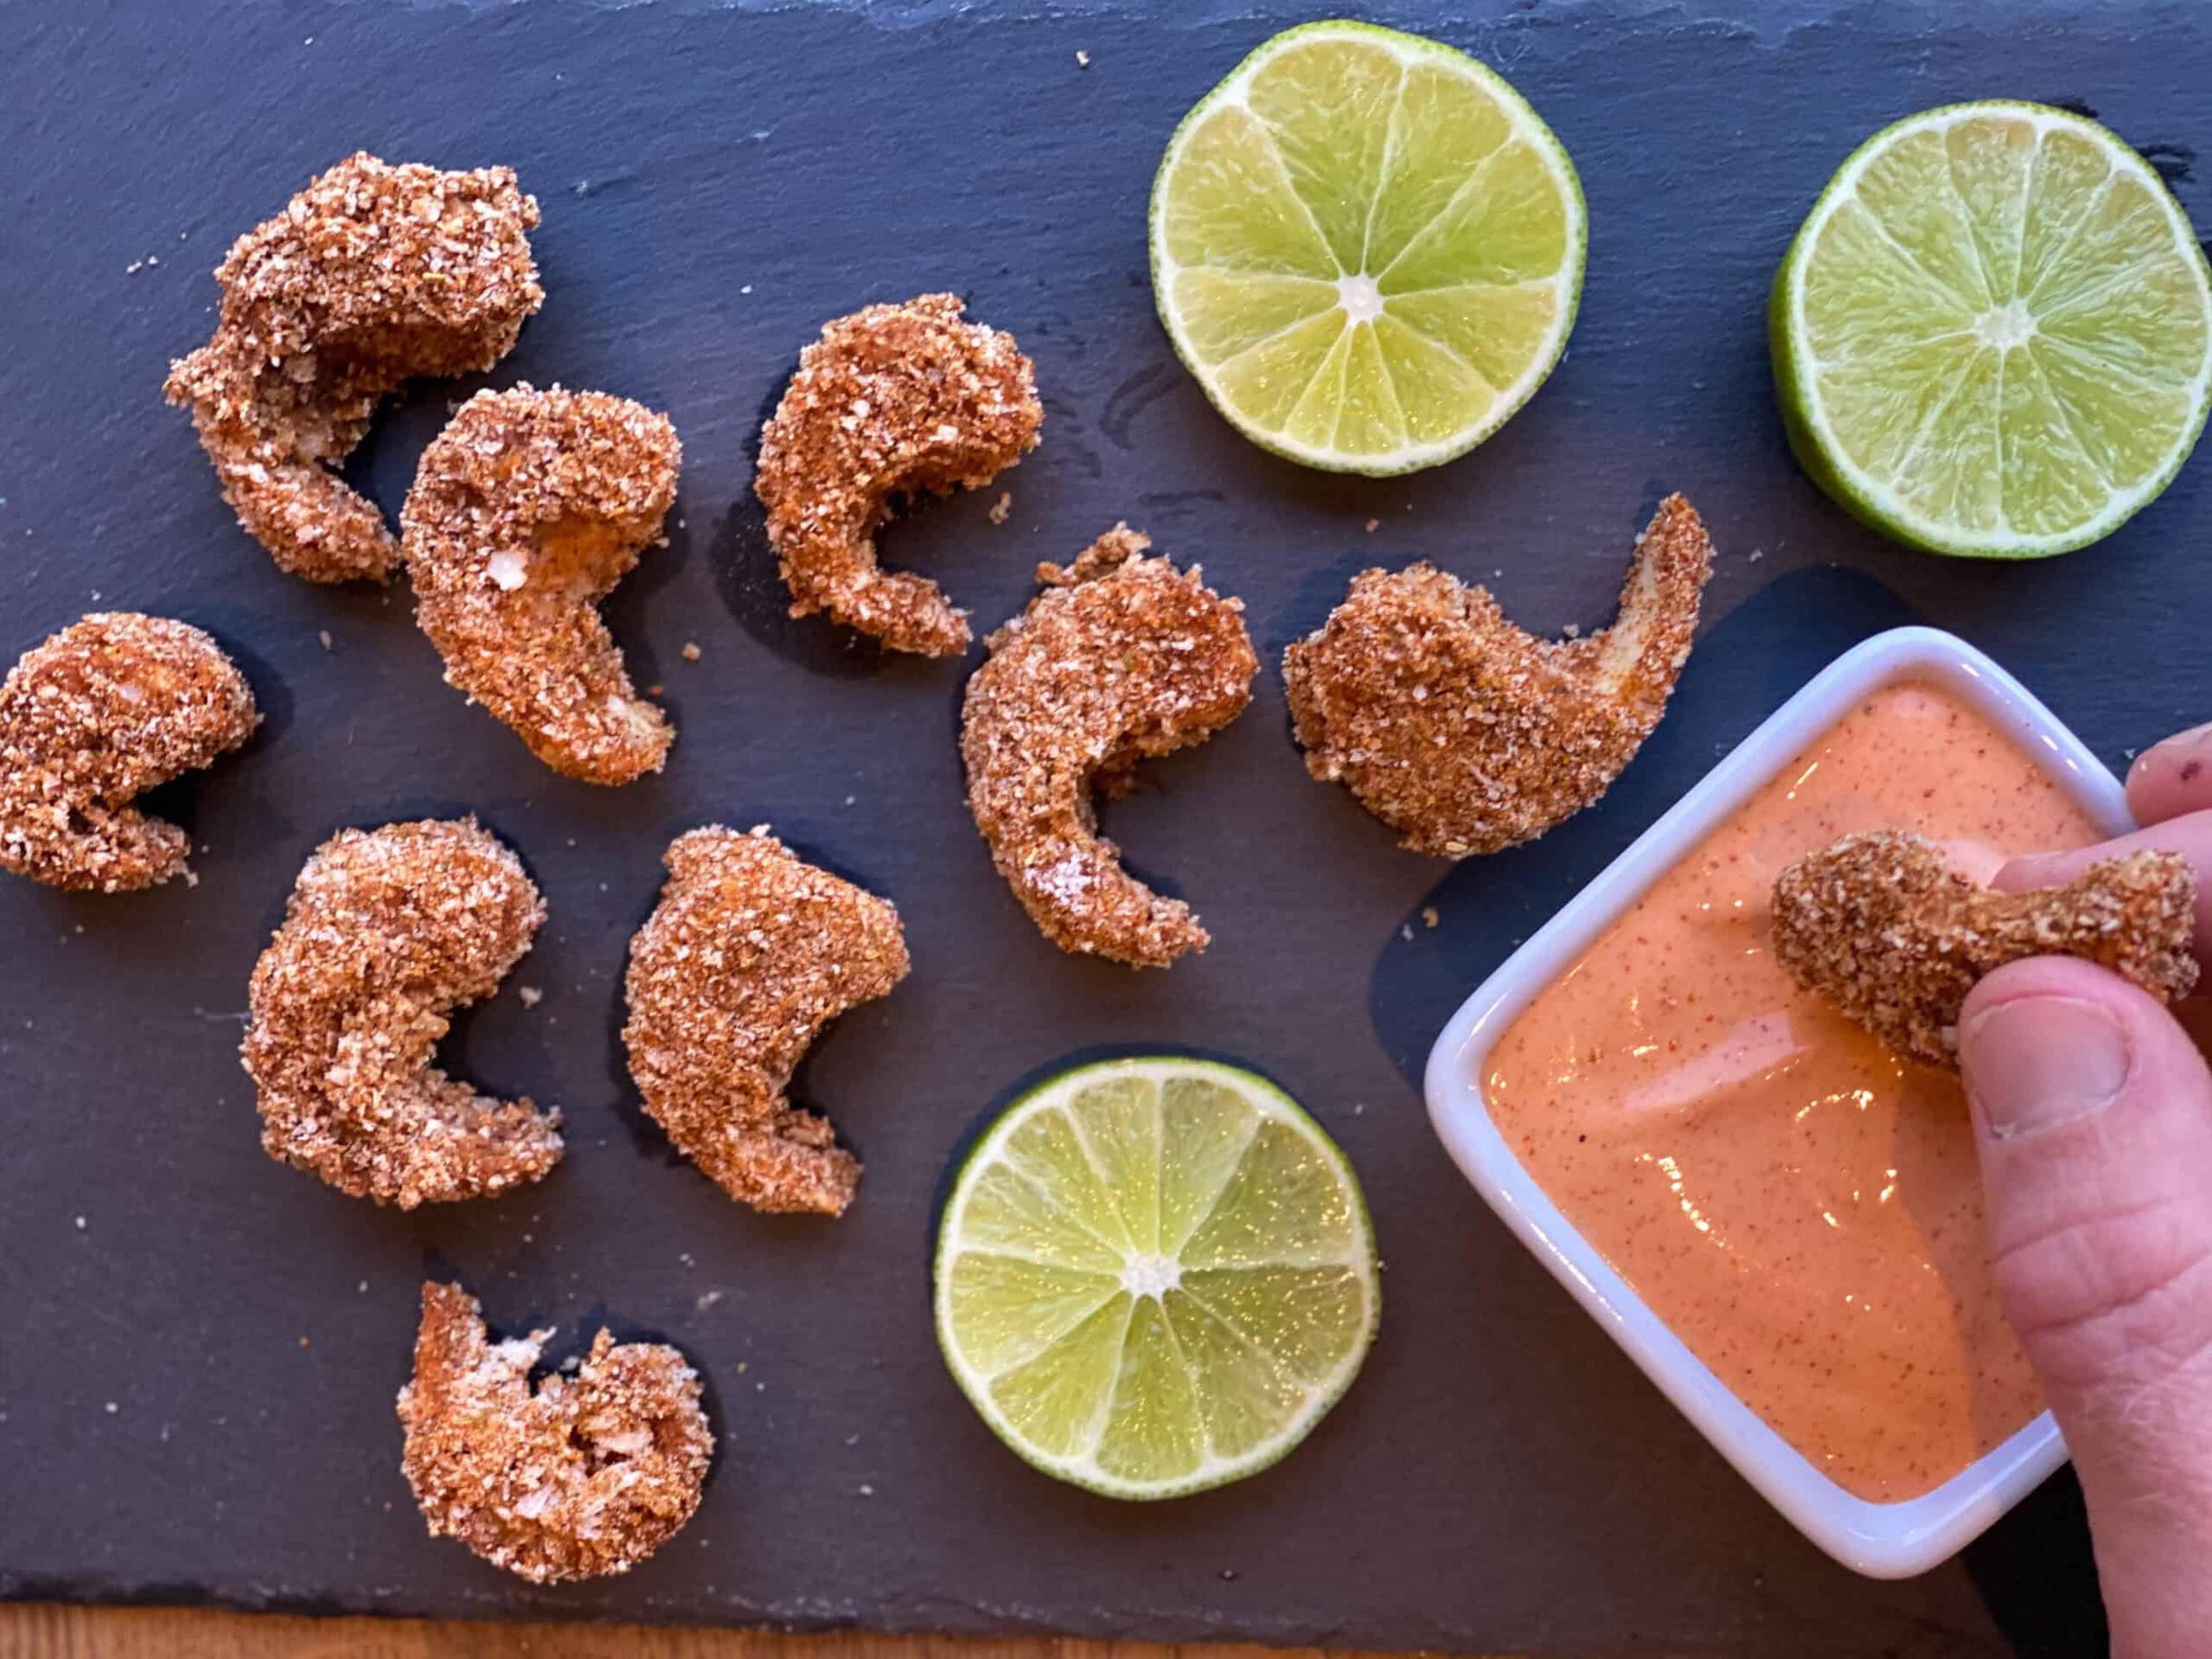  For those craving seafood but prefer a vegan alternative, this is the perfect recipe.